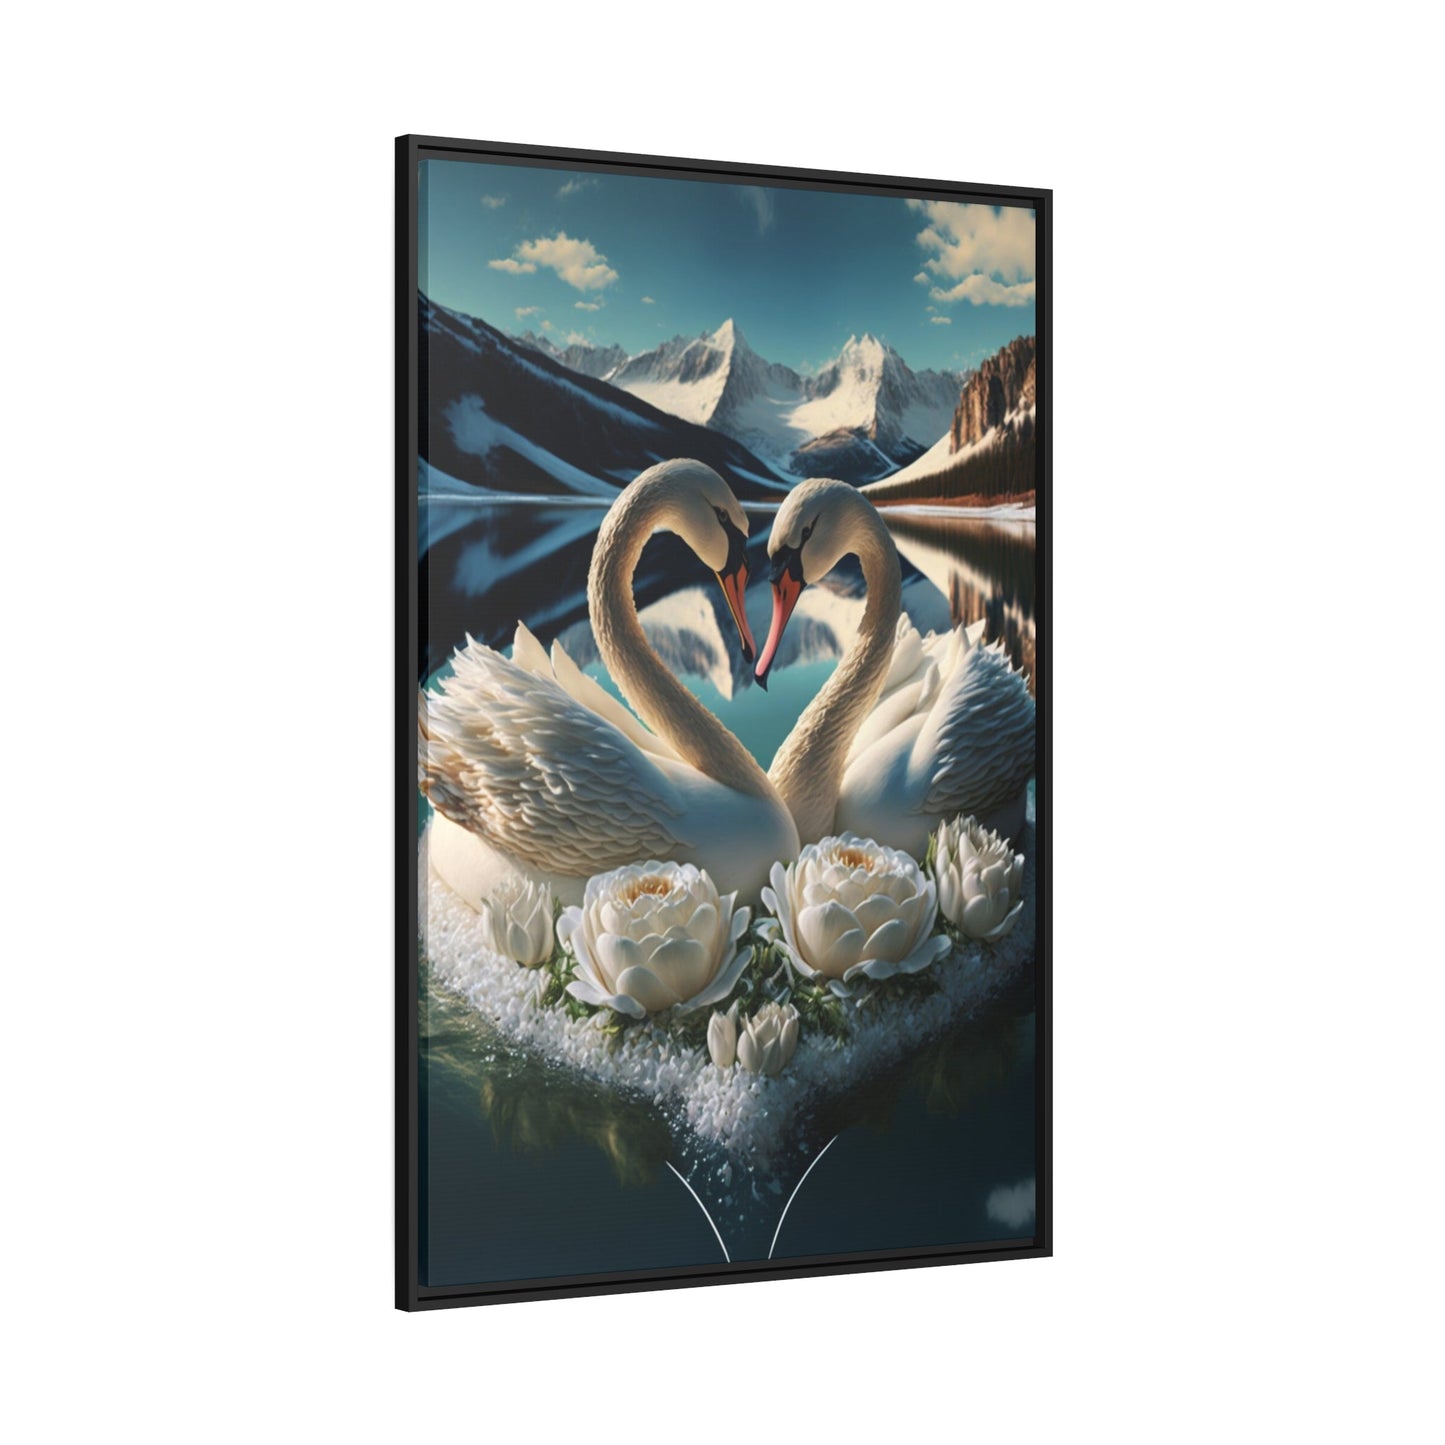 The Majesty of Swans: Framed Canvas Print of These Beautiful Birds in Their Natural Element